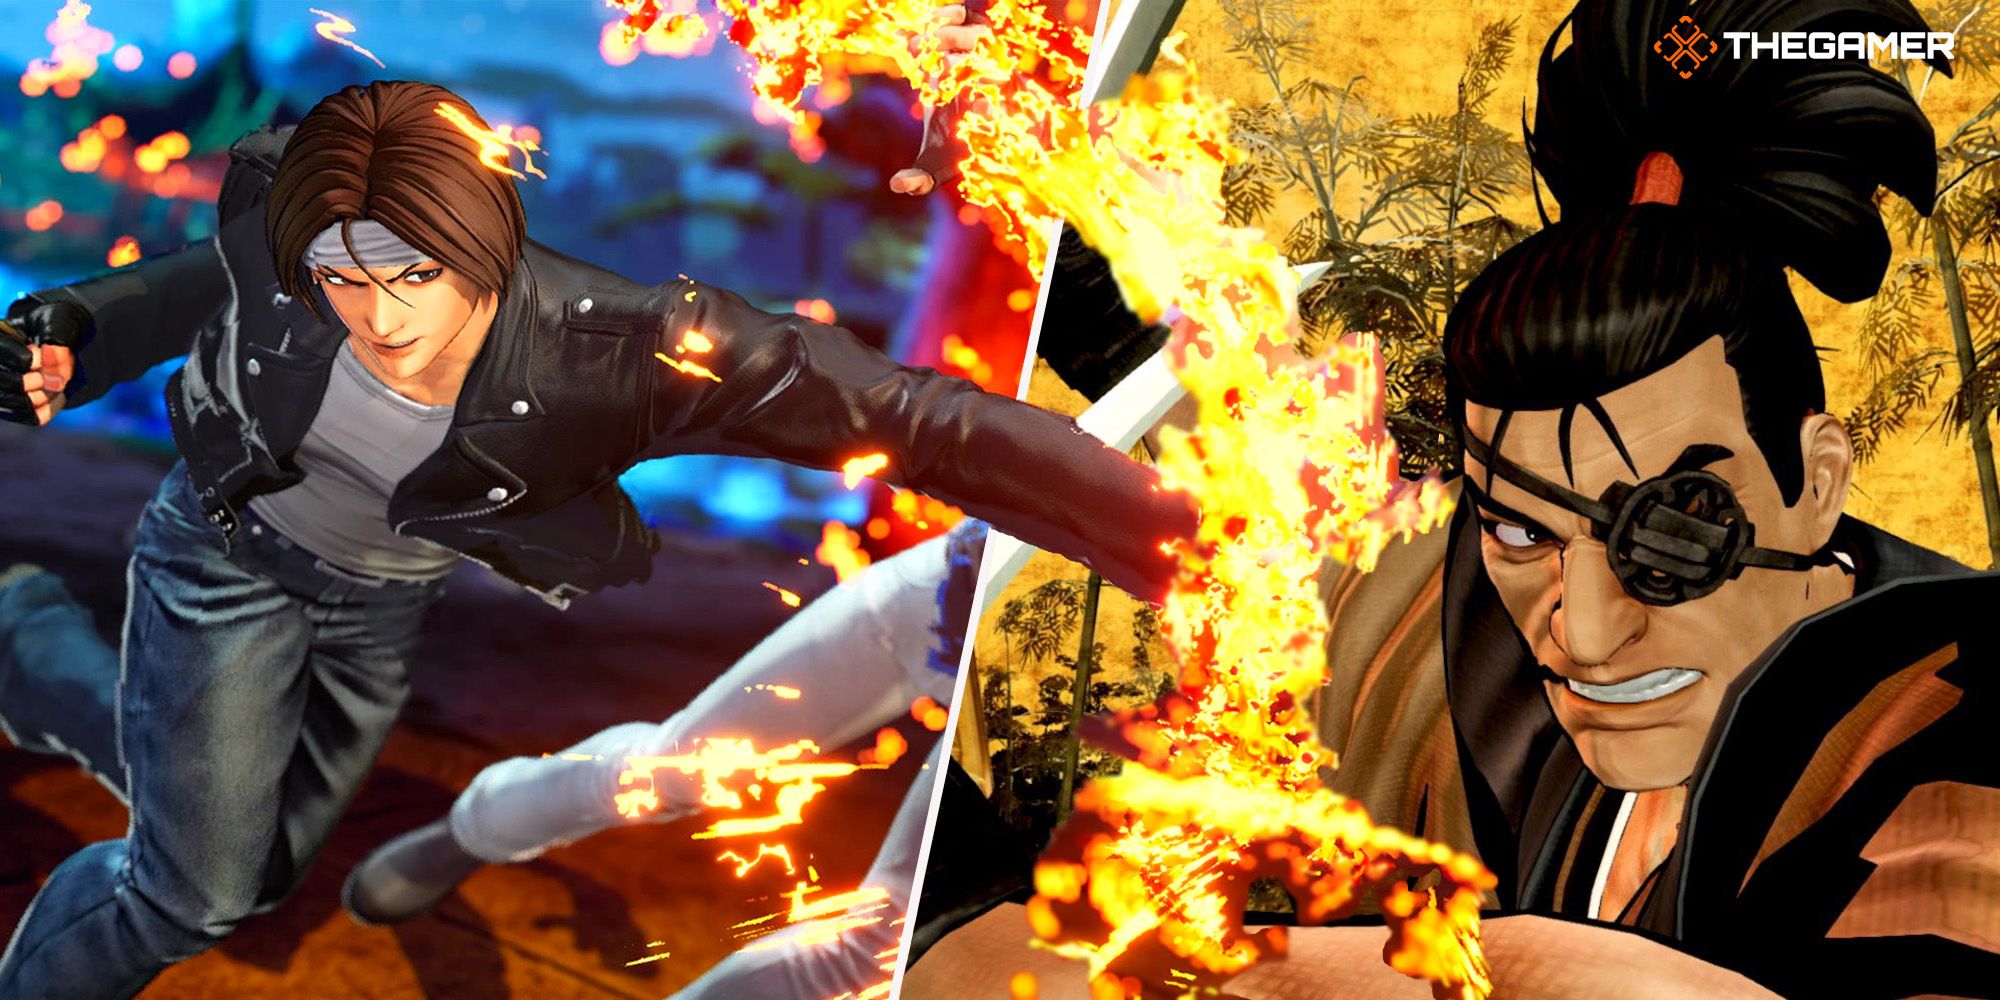 [Left Panel] Kyo hits Benimaru with a fiery punch in The King Of Fighters 15. [Right Panel] Jubei prepares his Super Special Move in Samurai Shodown (2019).